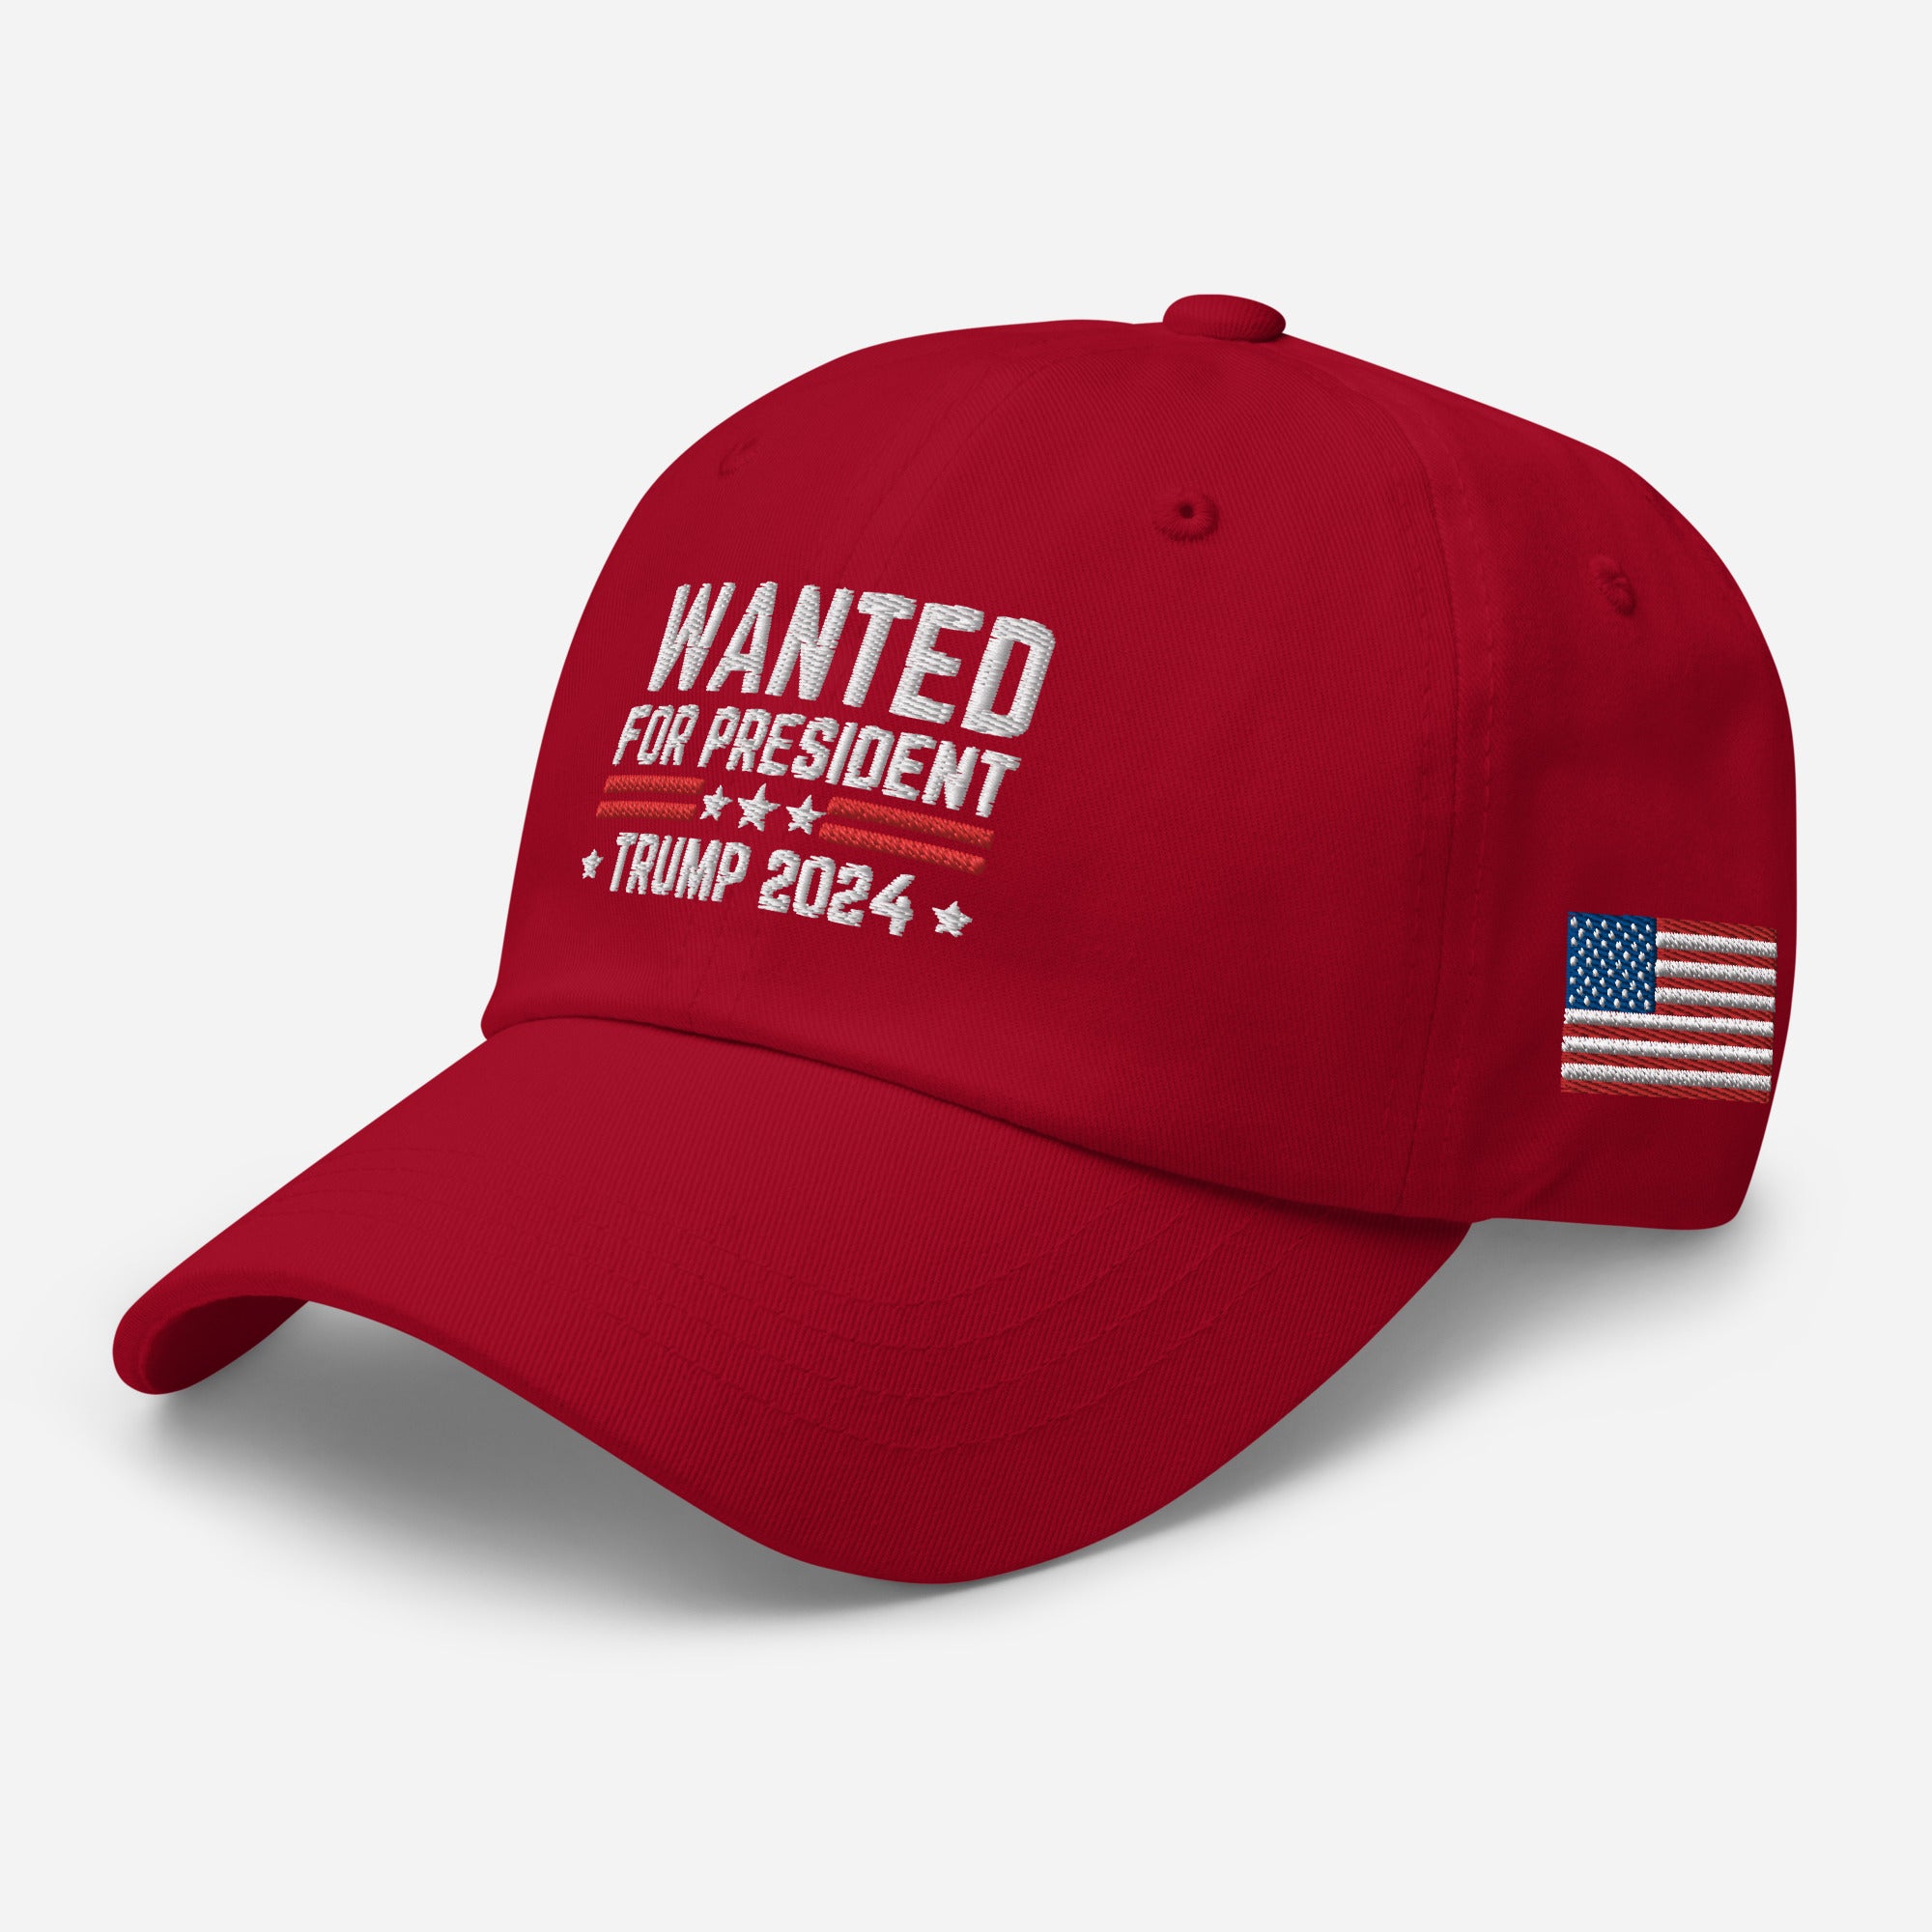 Wanted For President Hat, Trump 2024 Dad Hat, Republican Gift, Funny Trump Hat, White House Trump 2024, Political Cap, Election Day Hats